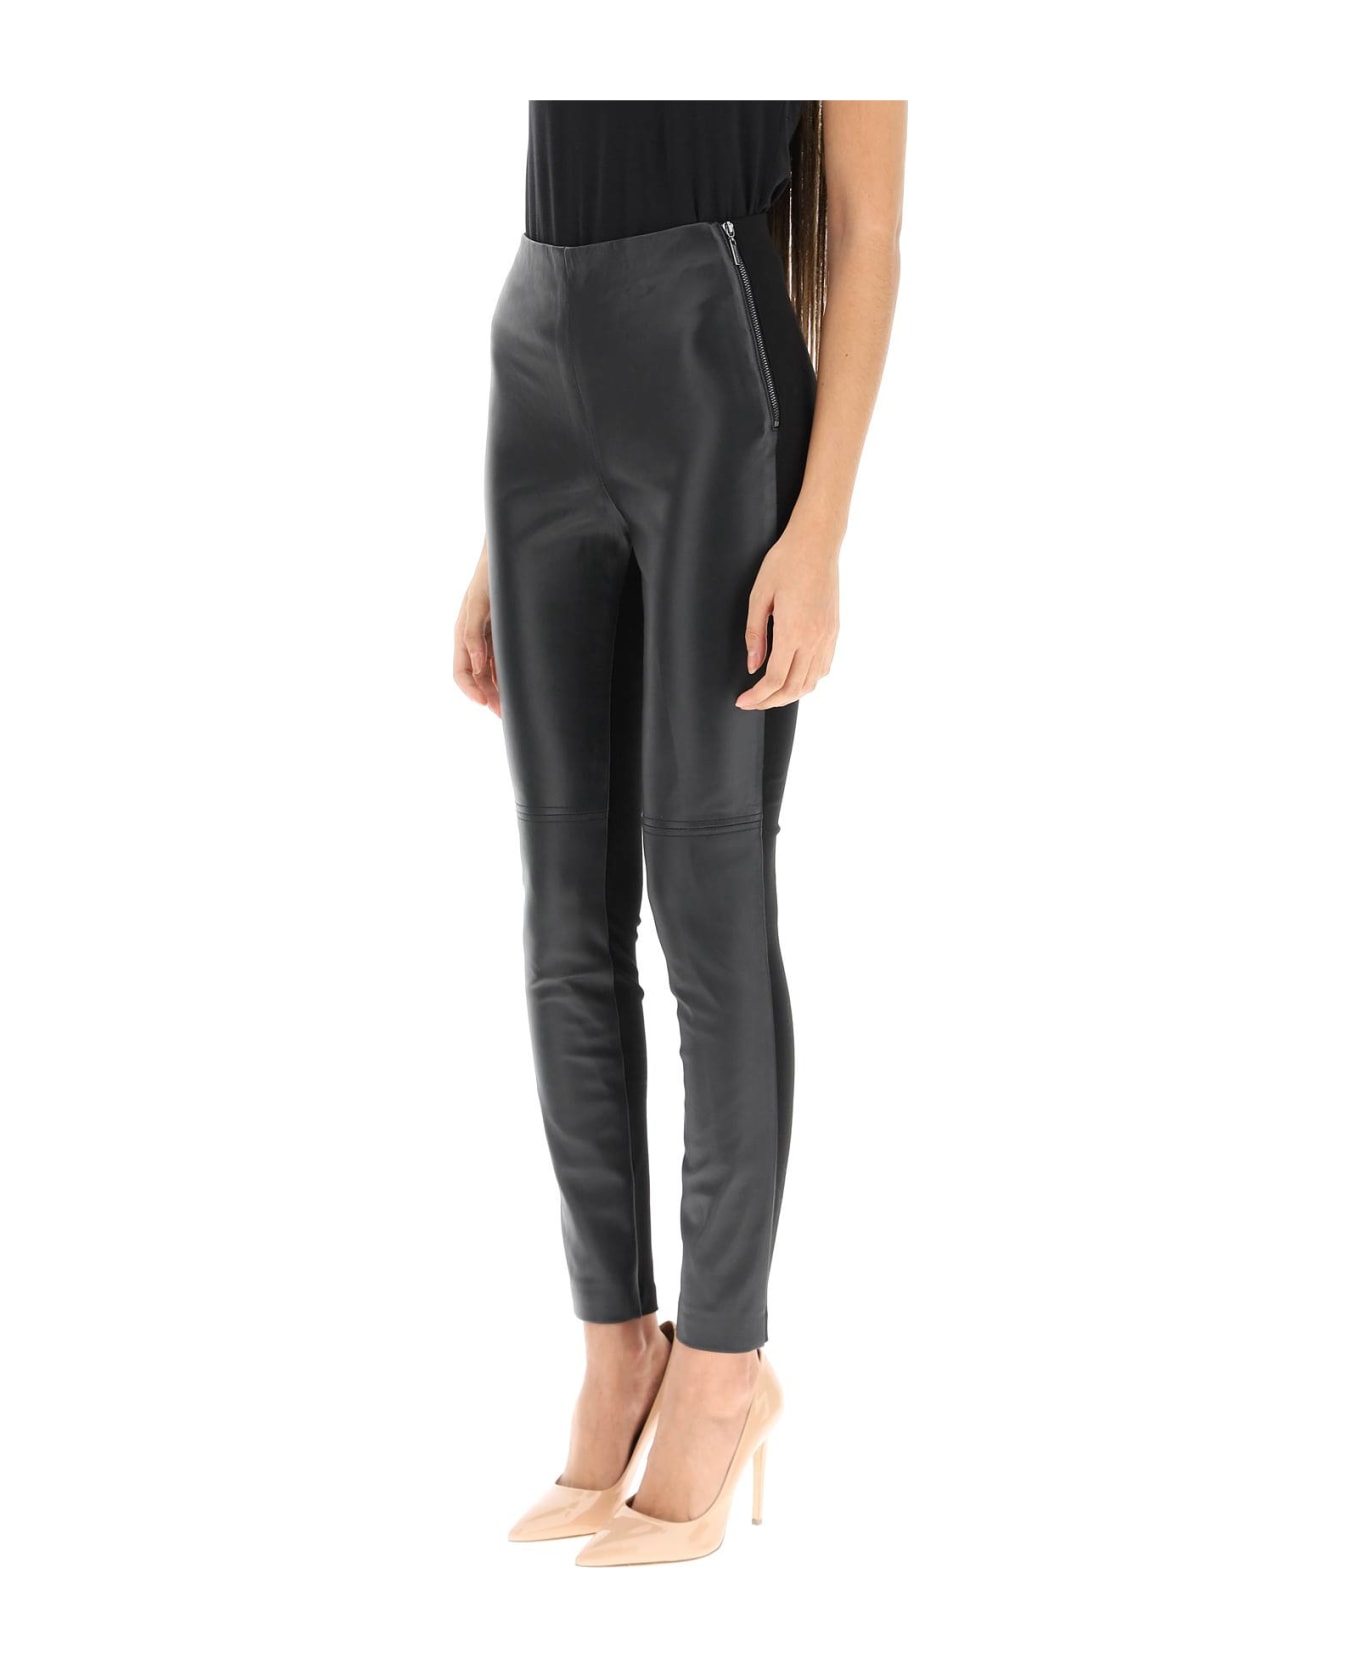 Guess by Marciano Leather And Jersey Leggings - JET BLACK A996 (Black)